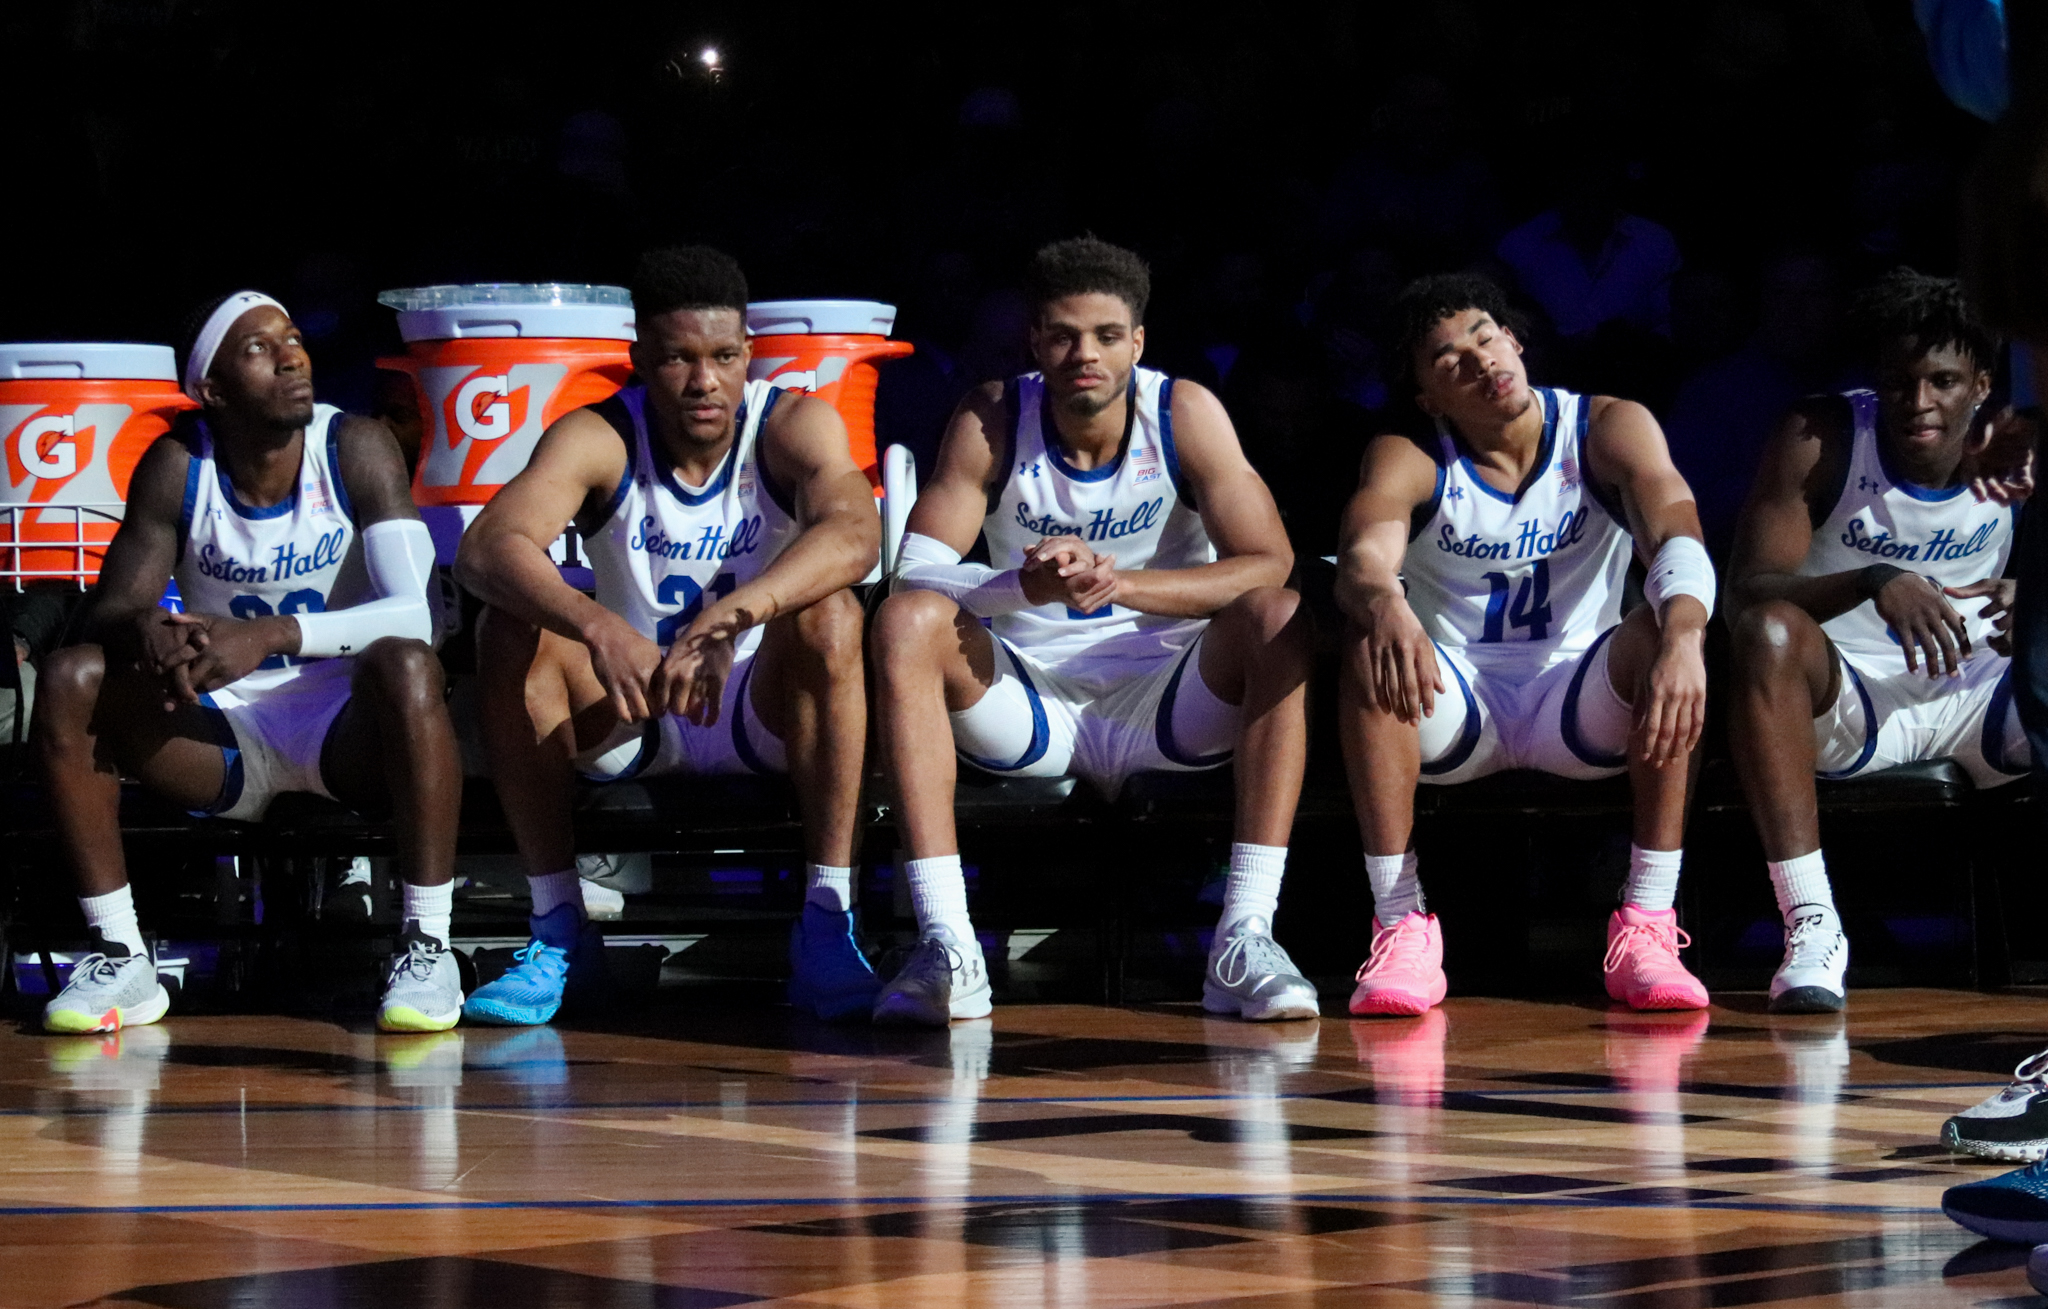 Members of the Seton Hall men's basketball team sit on the bench during pregame of a home matchup.